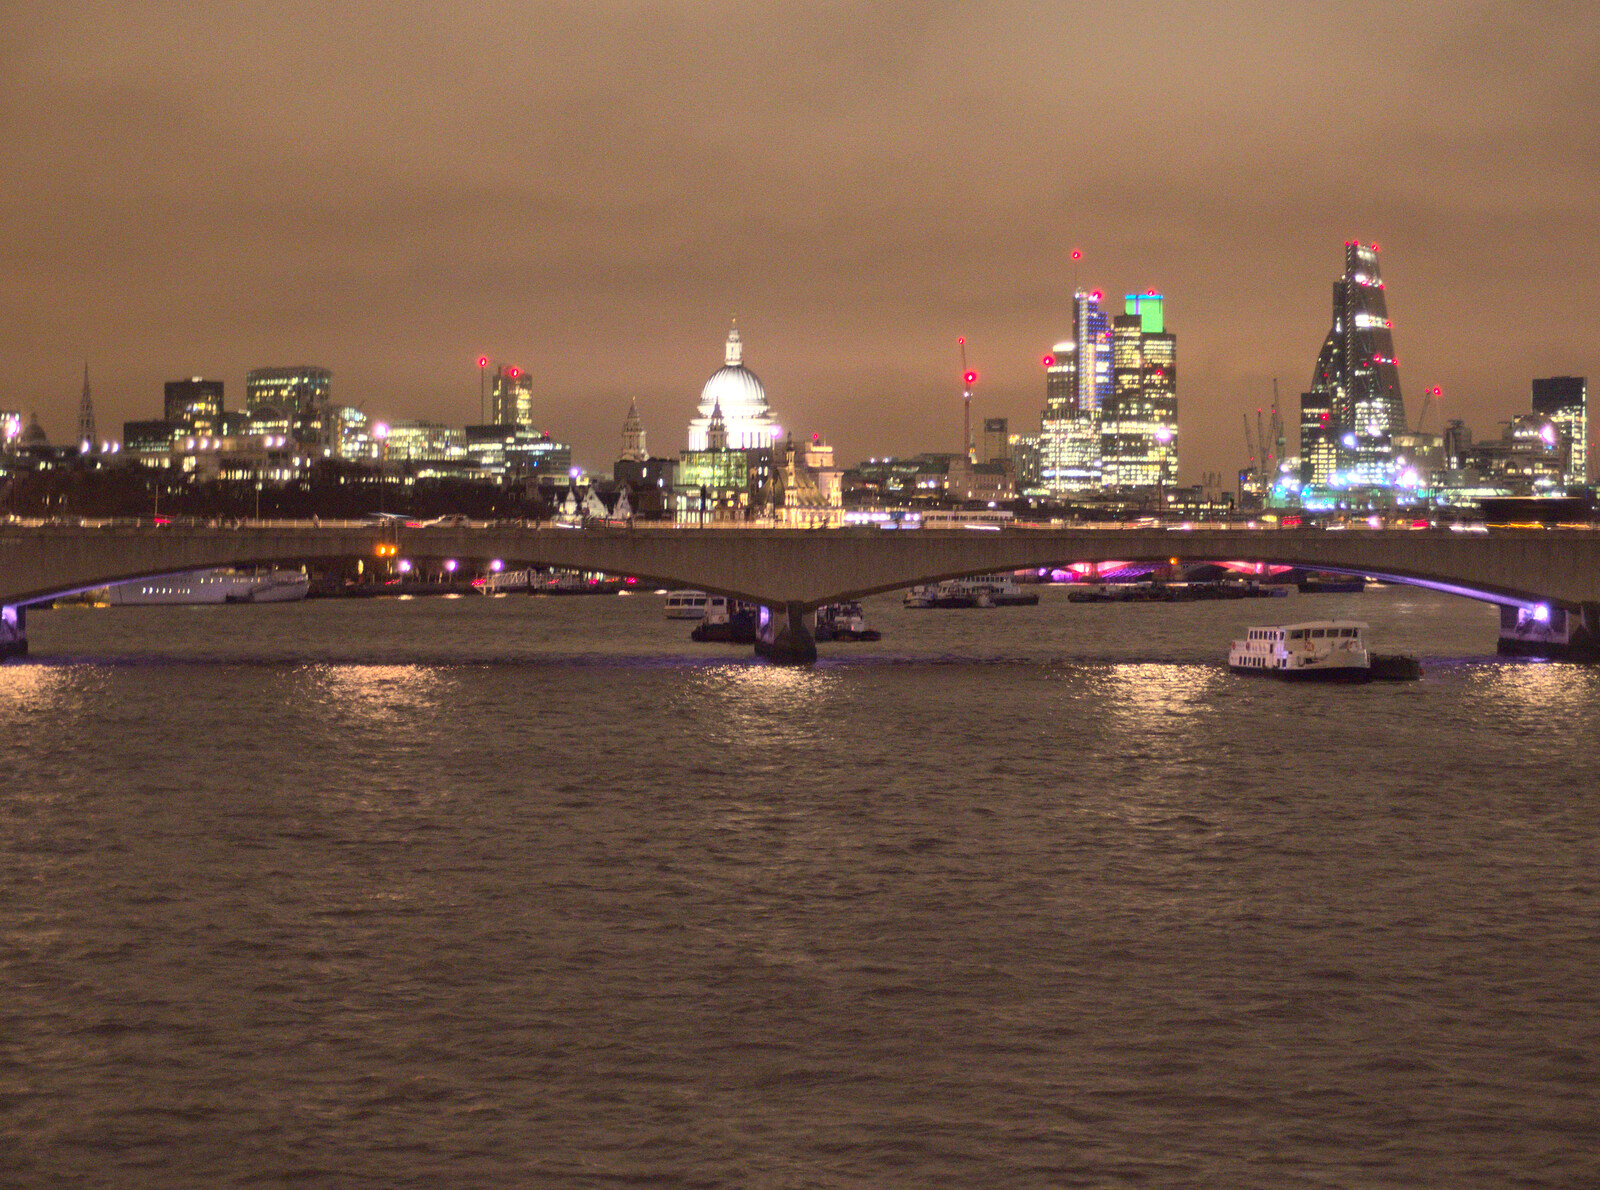 Waterloo Bridge and beyond, to the City of London from SwiftKey Innovation Nights, Westminster, London - 19th December 2014